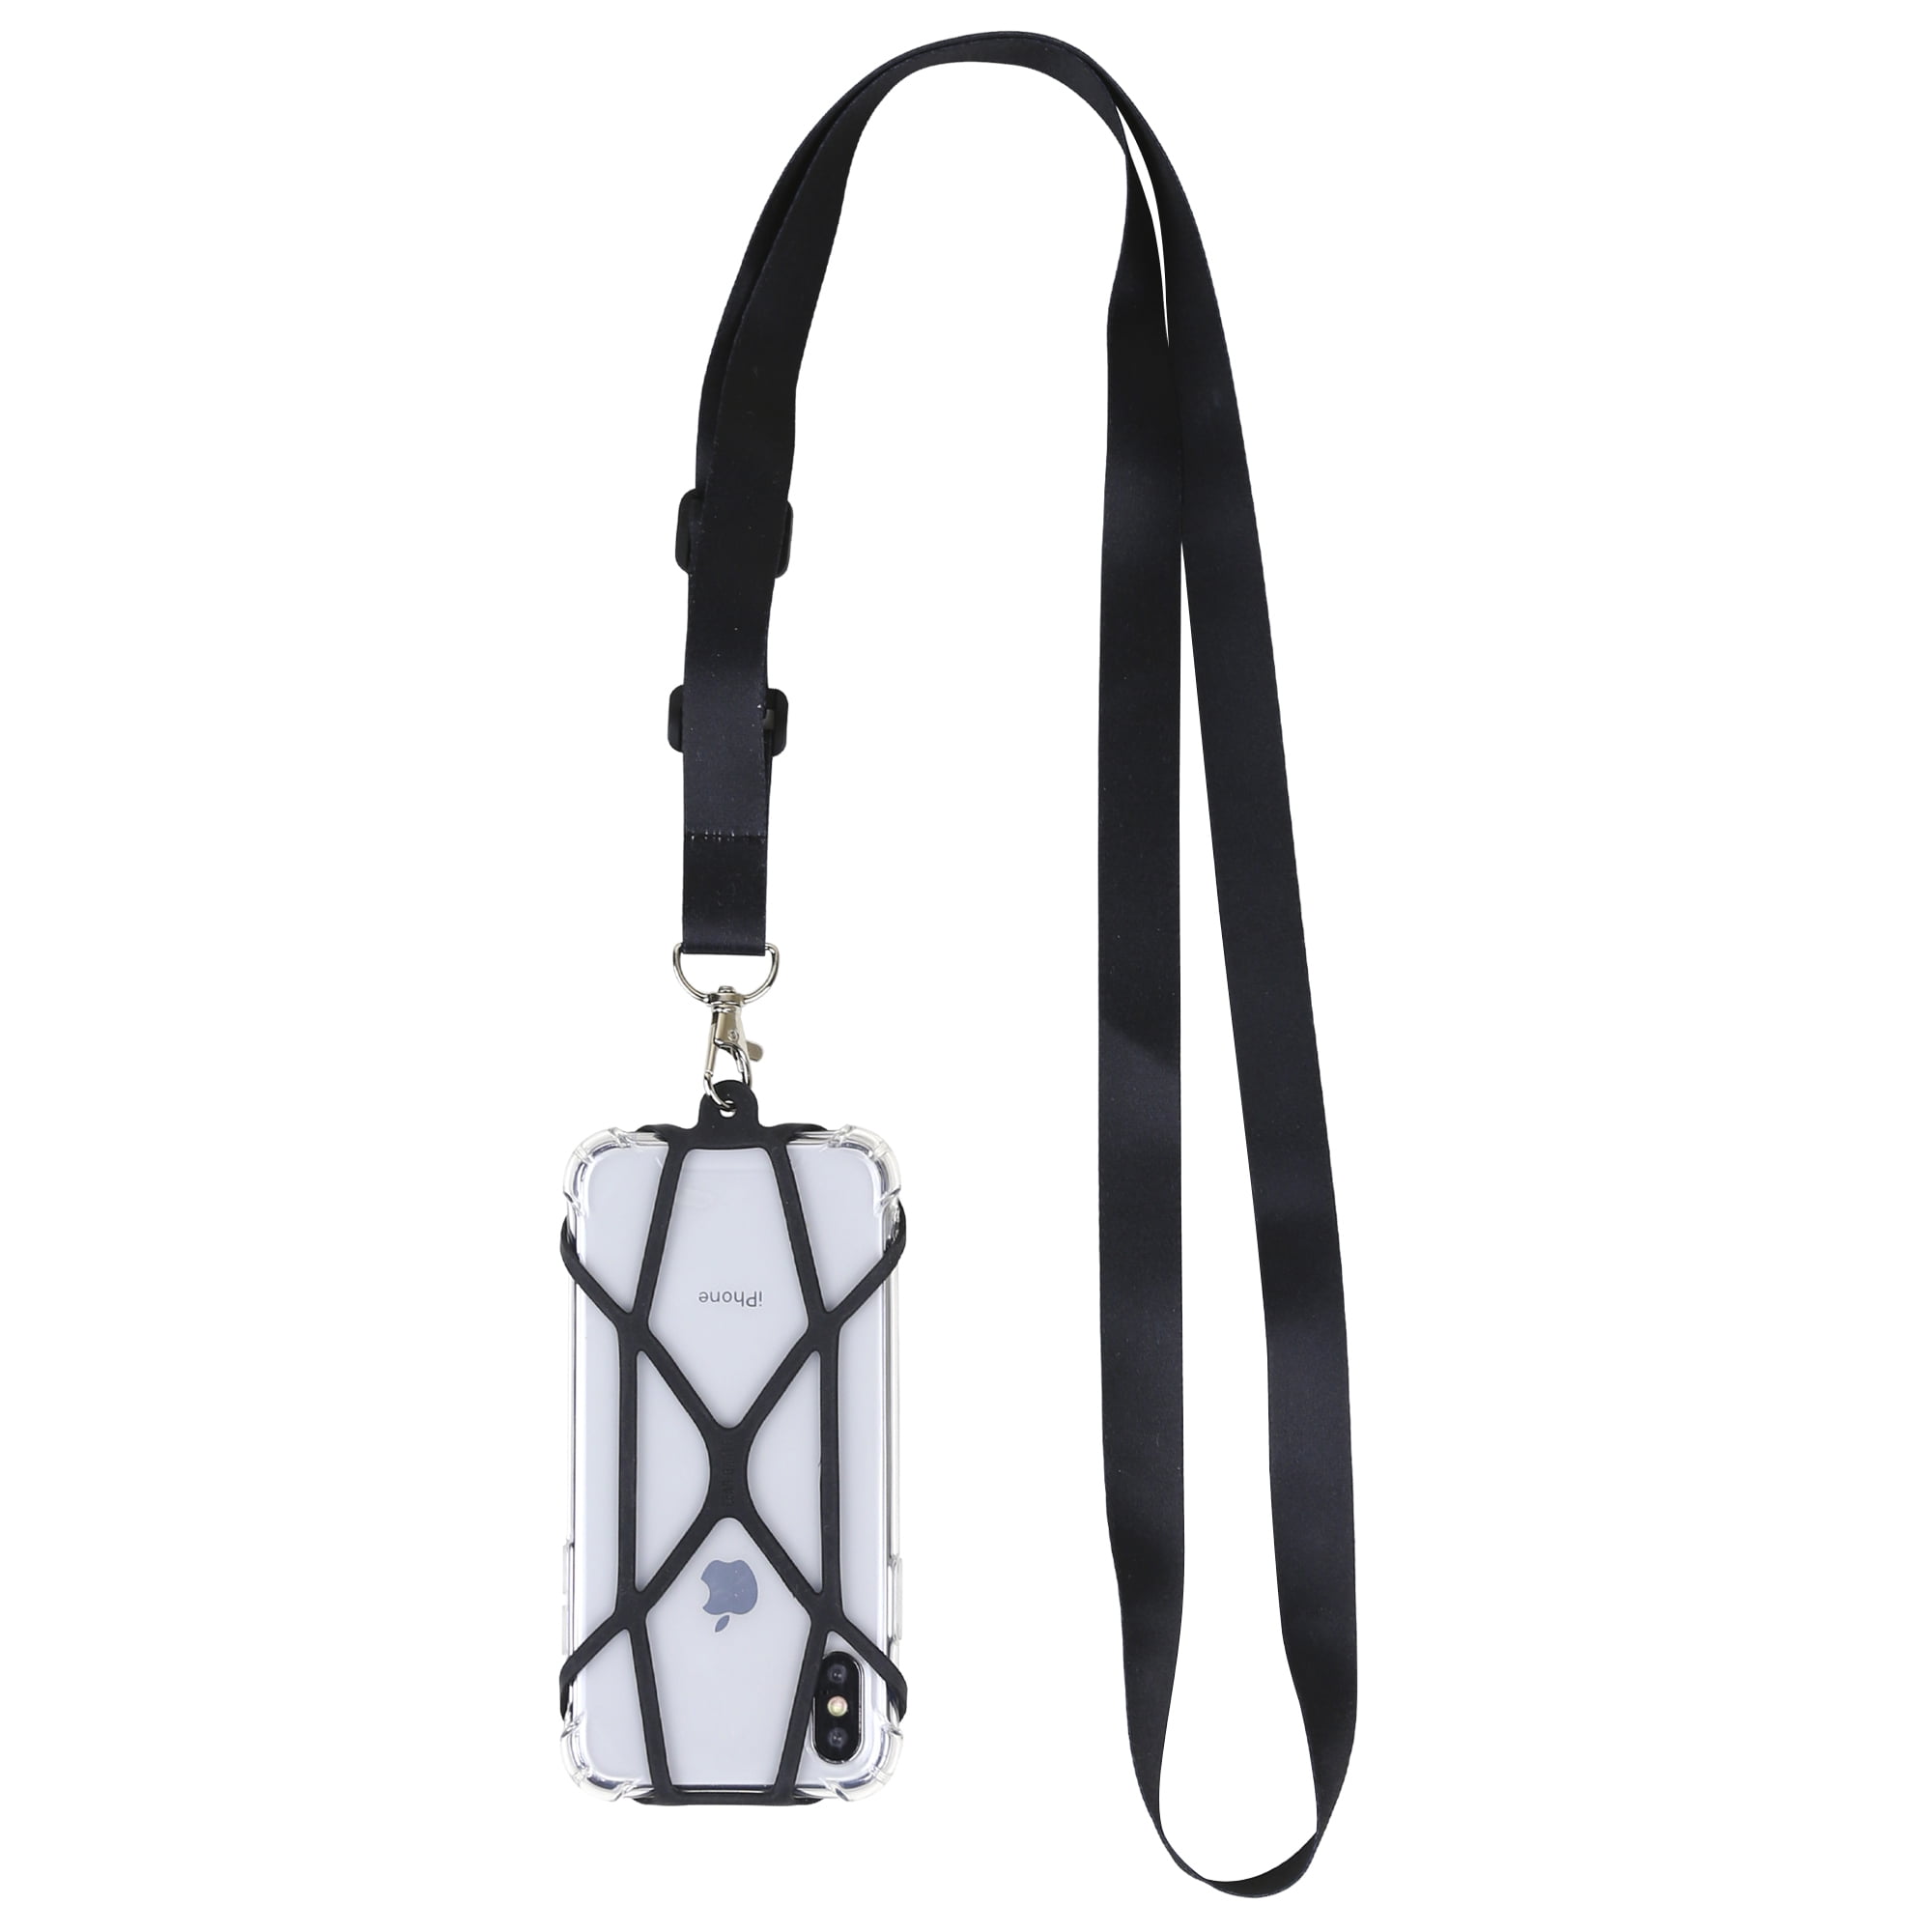 Ethnic White Black Spirius Sports Anti-Lost Universal Mobile Phone Holder Lanyard Neck Strap with Card Slot for Samsung I Phone Huawei